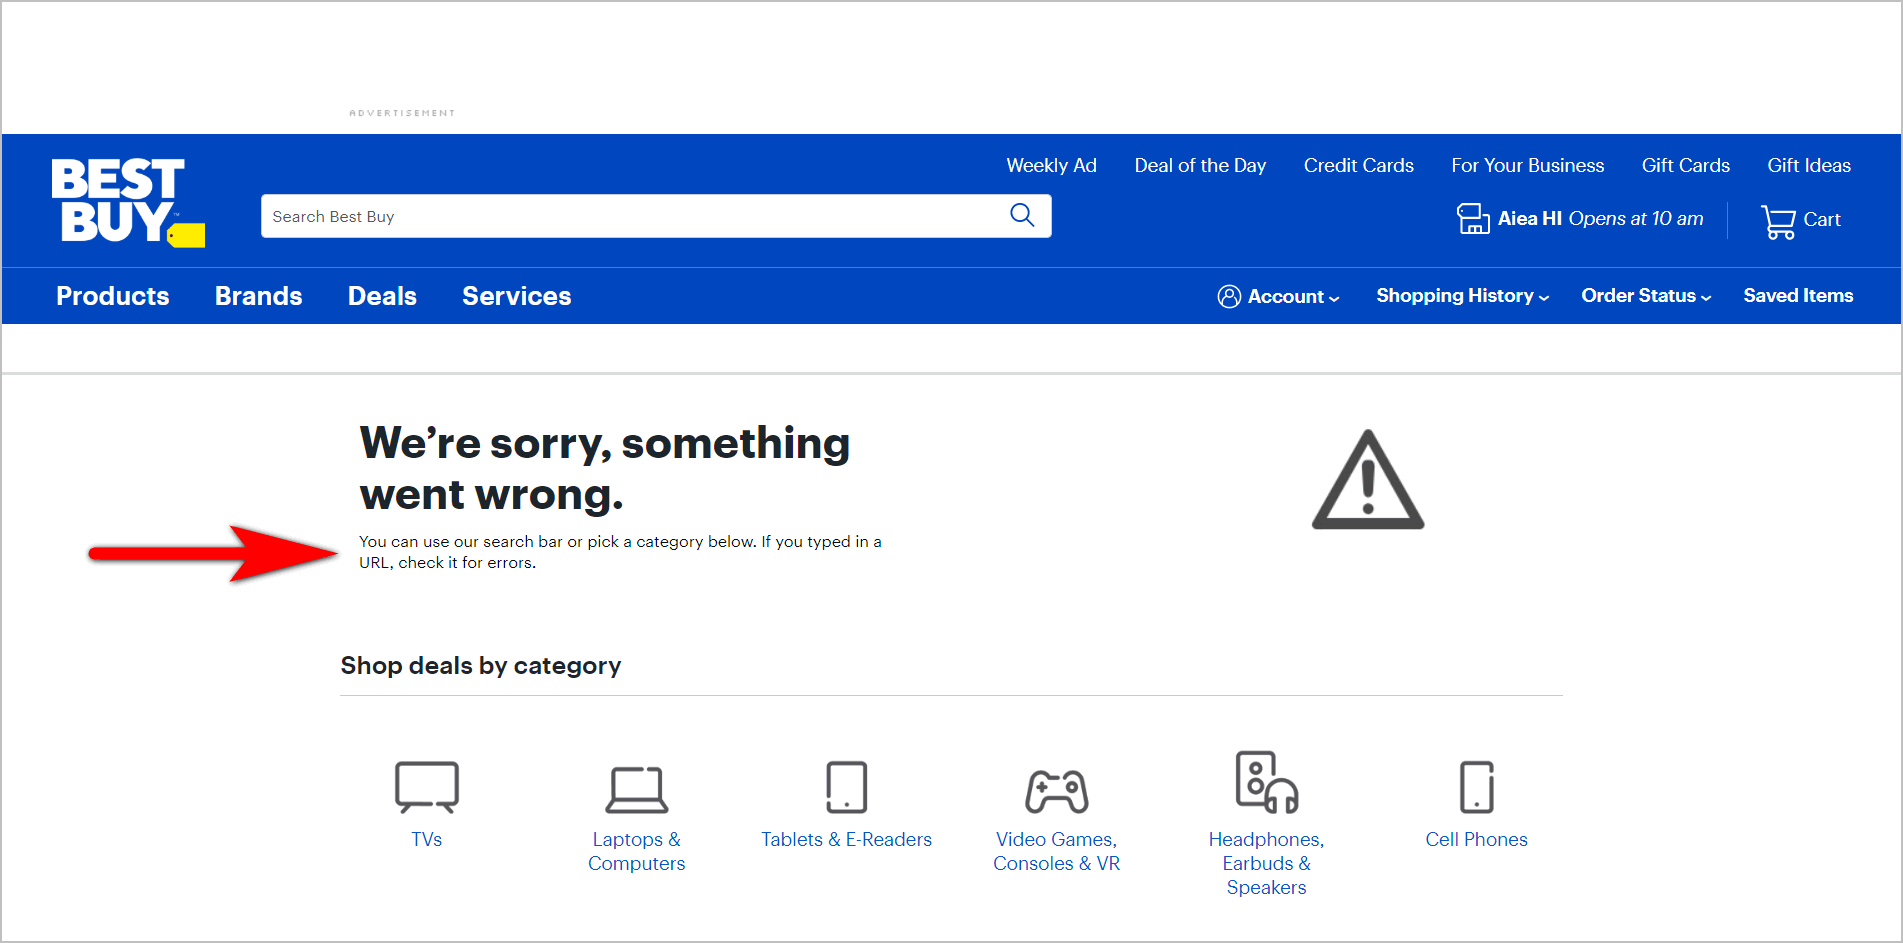 holiday e-commerce recommendation: helping users recover on a 404 page example- bestbuy.com's 404 page with message "we're sorry, something went wrong" plus suggestions to use search bar, to choose one of the product categories presented below, or to check the URL the user typed in for errors